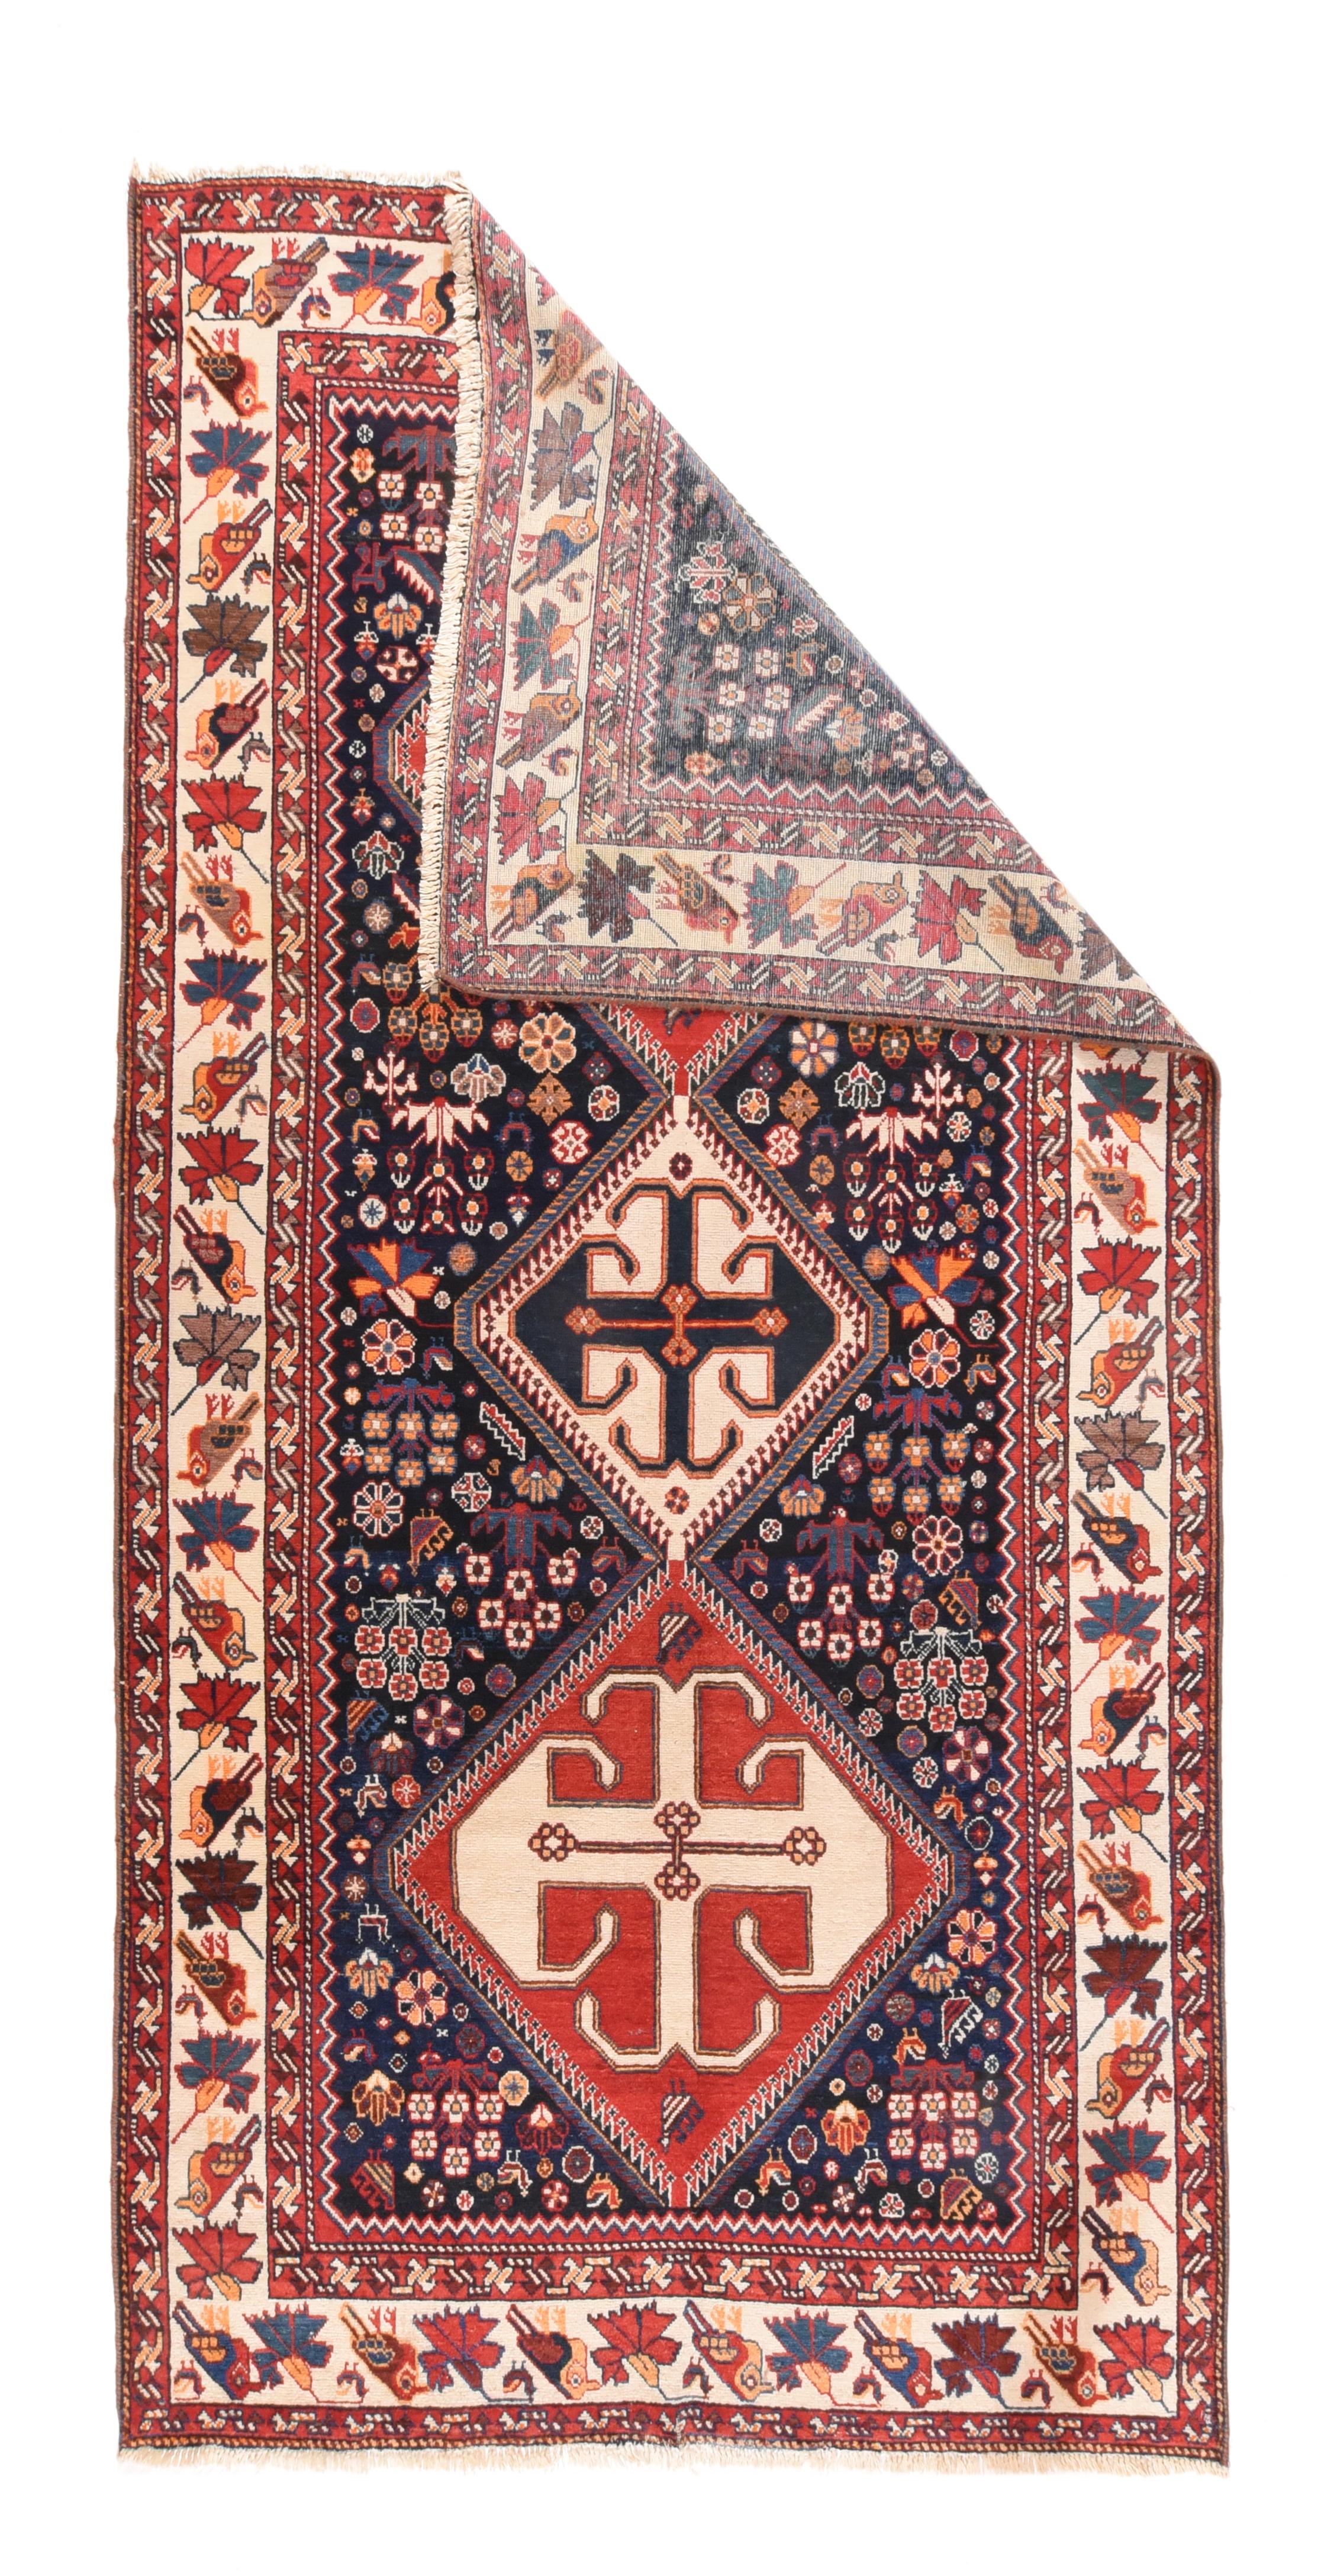 Antique Persian Rug 5'3'' x 10'. This rustic kellegi (long rug) shows a three section pole medallion in red and ivory, with sawtooth edges and hooked peripheries, on a navy ground closely strewn with rosettes and upright flowers. Bold ivory and near